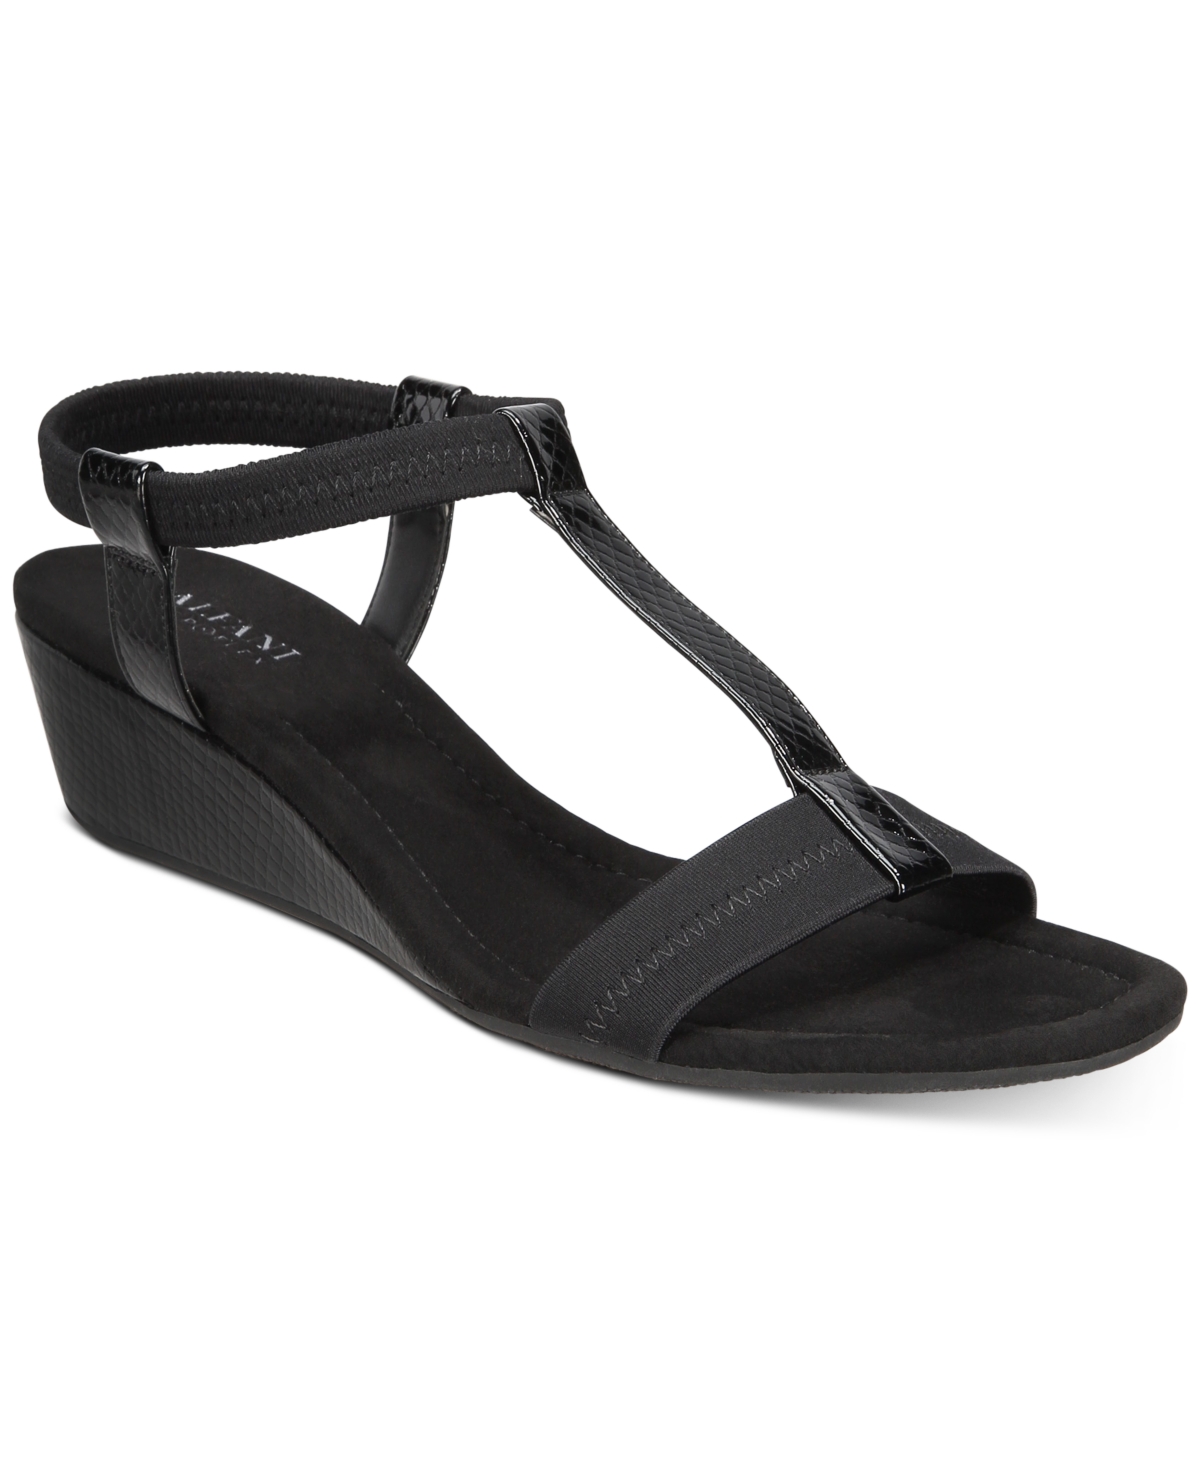 Women's Step 'N Flex Voyage Wedge Sandals, Created for Macy's - Black Patent Snake